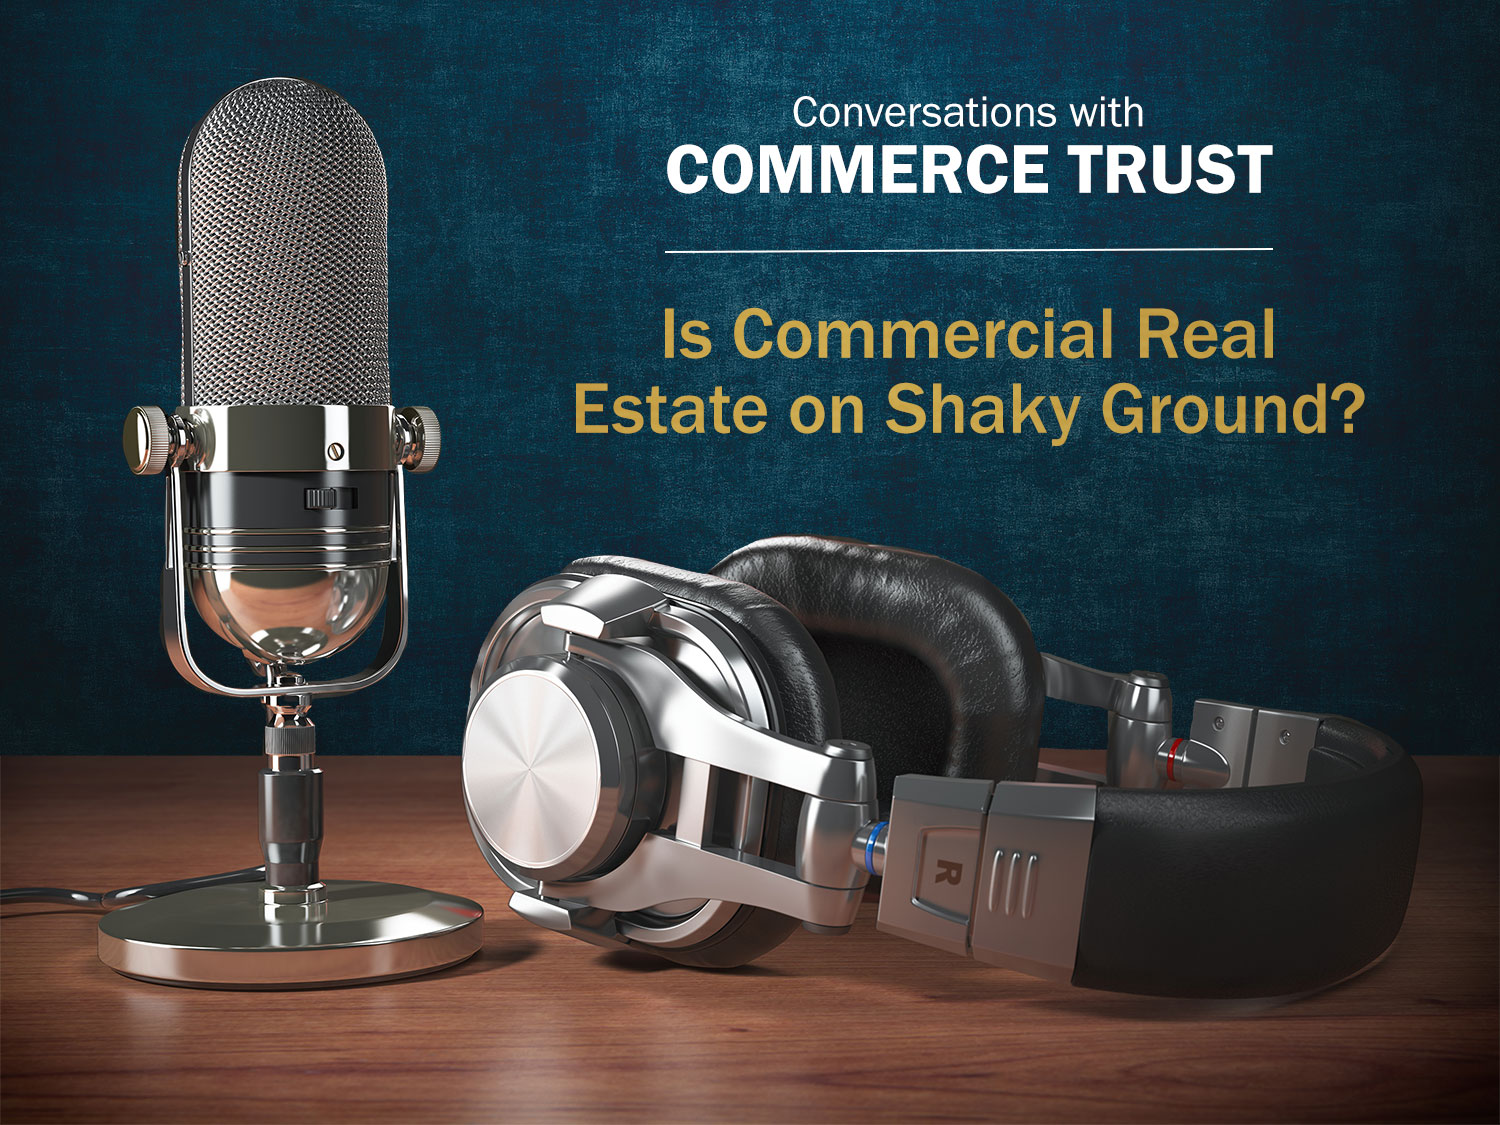 Is Commercial Real Estate on Shaky Ground?